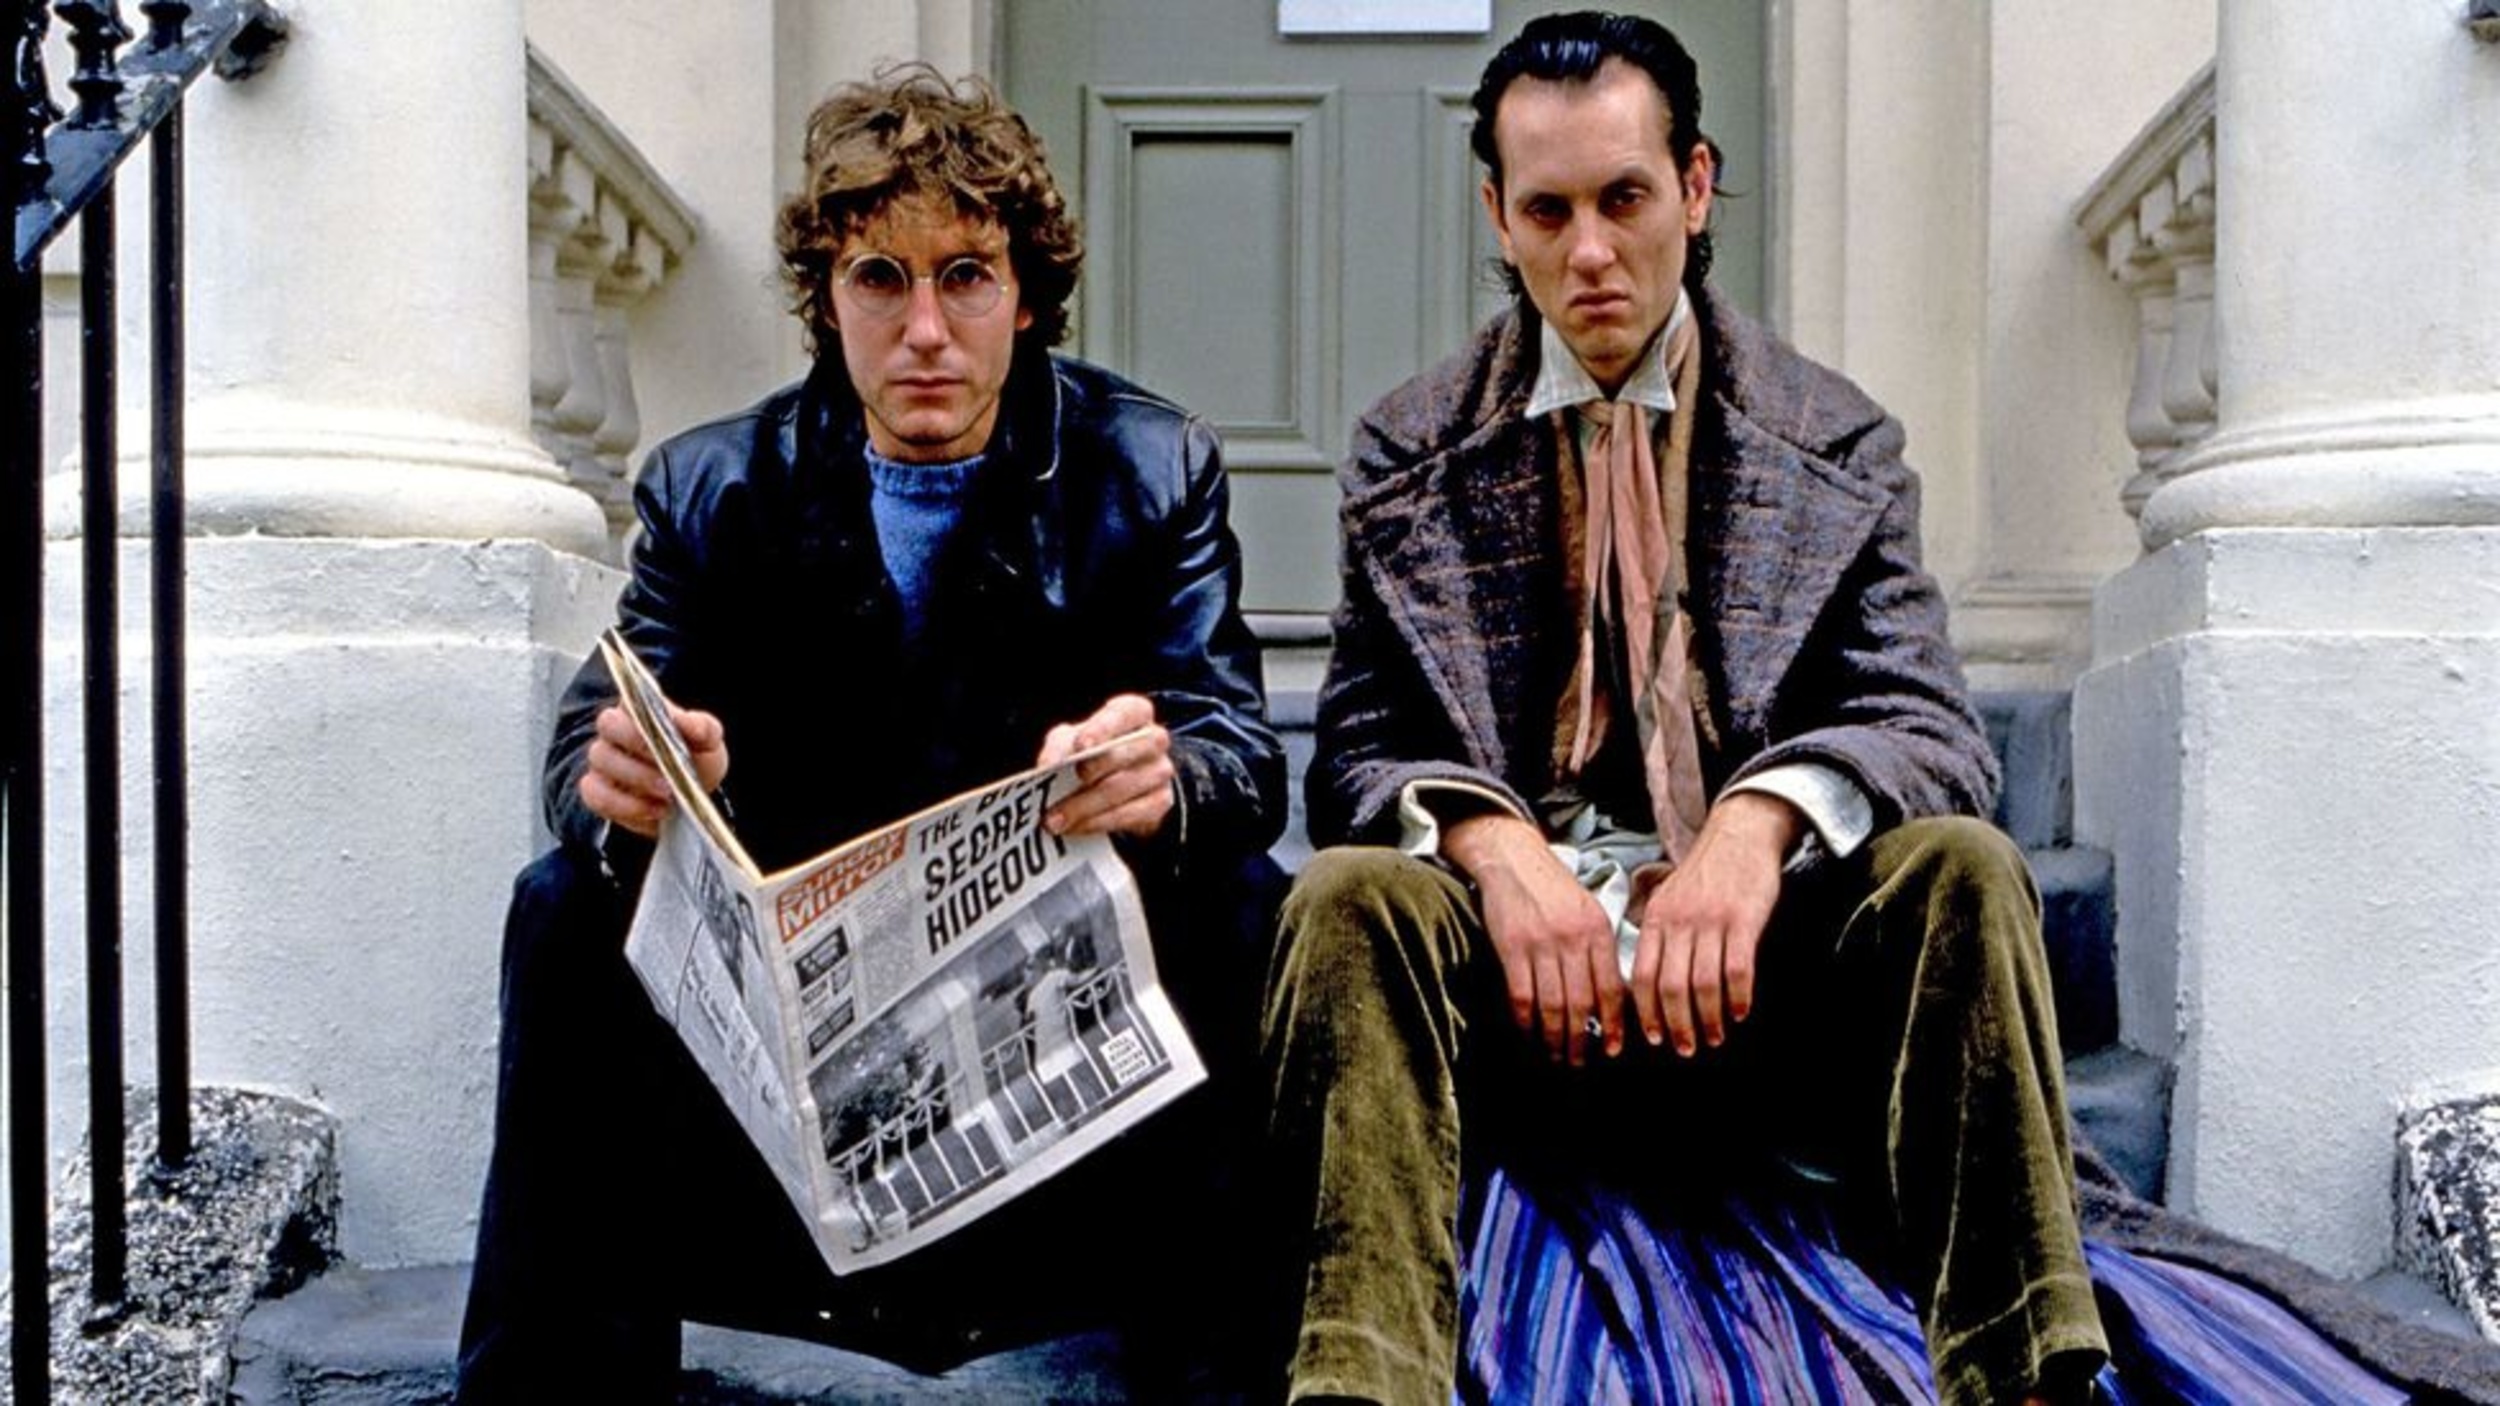 <p><em>Oliver! </em>may be a street-level version of London, but a family-friendly musical version of it. <em>Withnail and I</em> is a different story. Withnail and “I" are two struggling actors who live in London in squalor. They seem to have only one friend, and he’s their drug dealer. It’s a bleak life. The kind where you drink lighter fluid. But it’s got a lot of London in it.</p><p>You may also like: <a href='https://www.yardbarker.com/entertainment/articles/25_stars_who_disappeared_from_the_limelight_040924/s1__26729258'>25 stars who disappeared from the limelight</a></p>